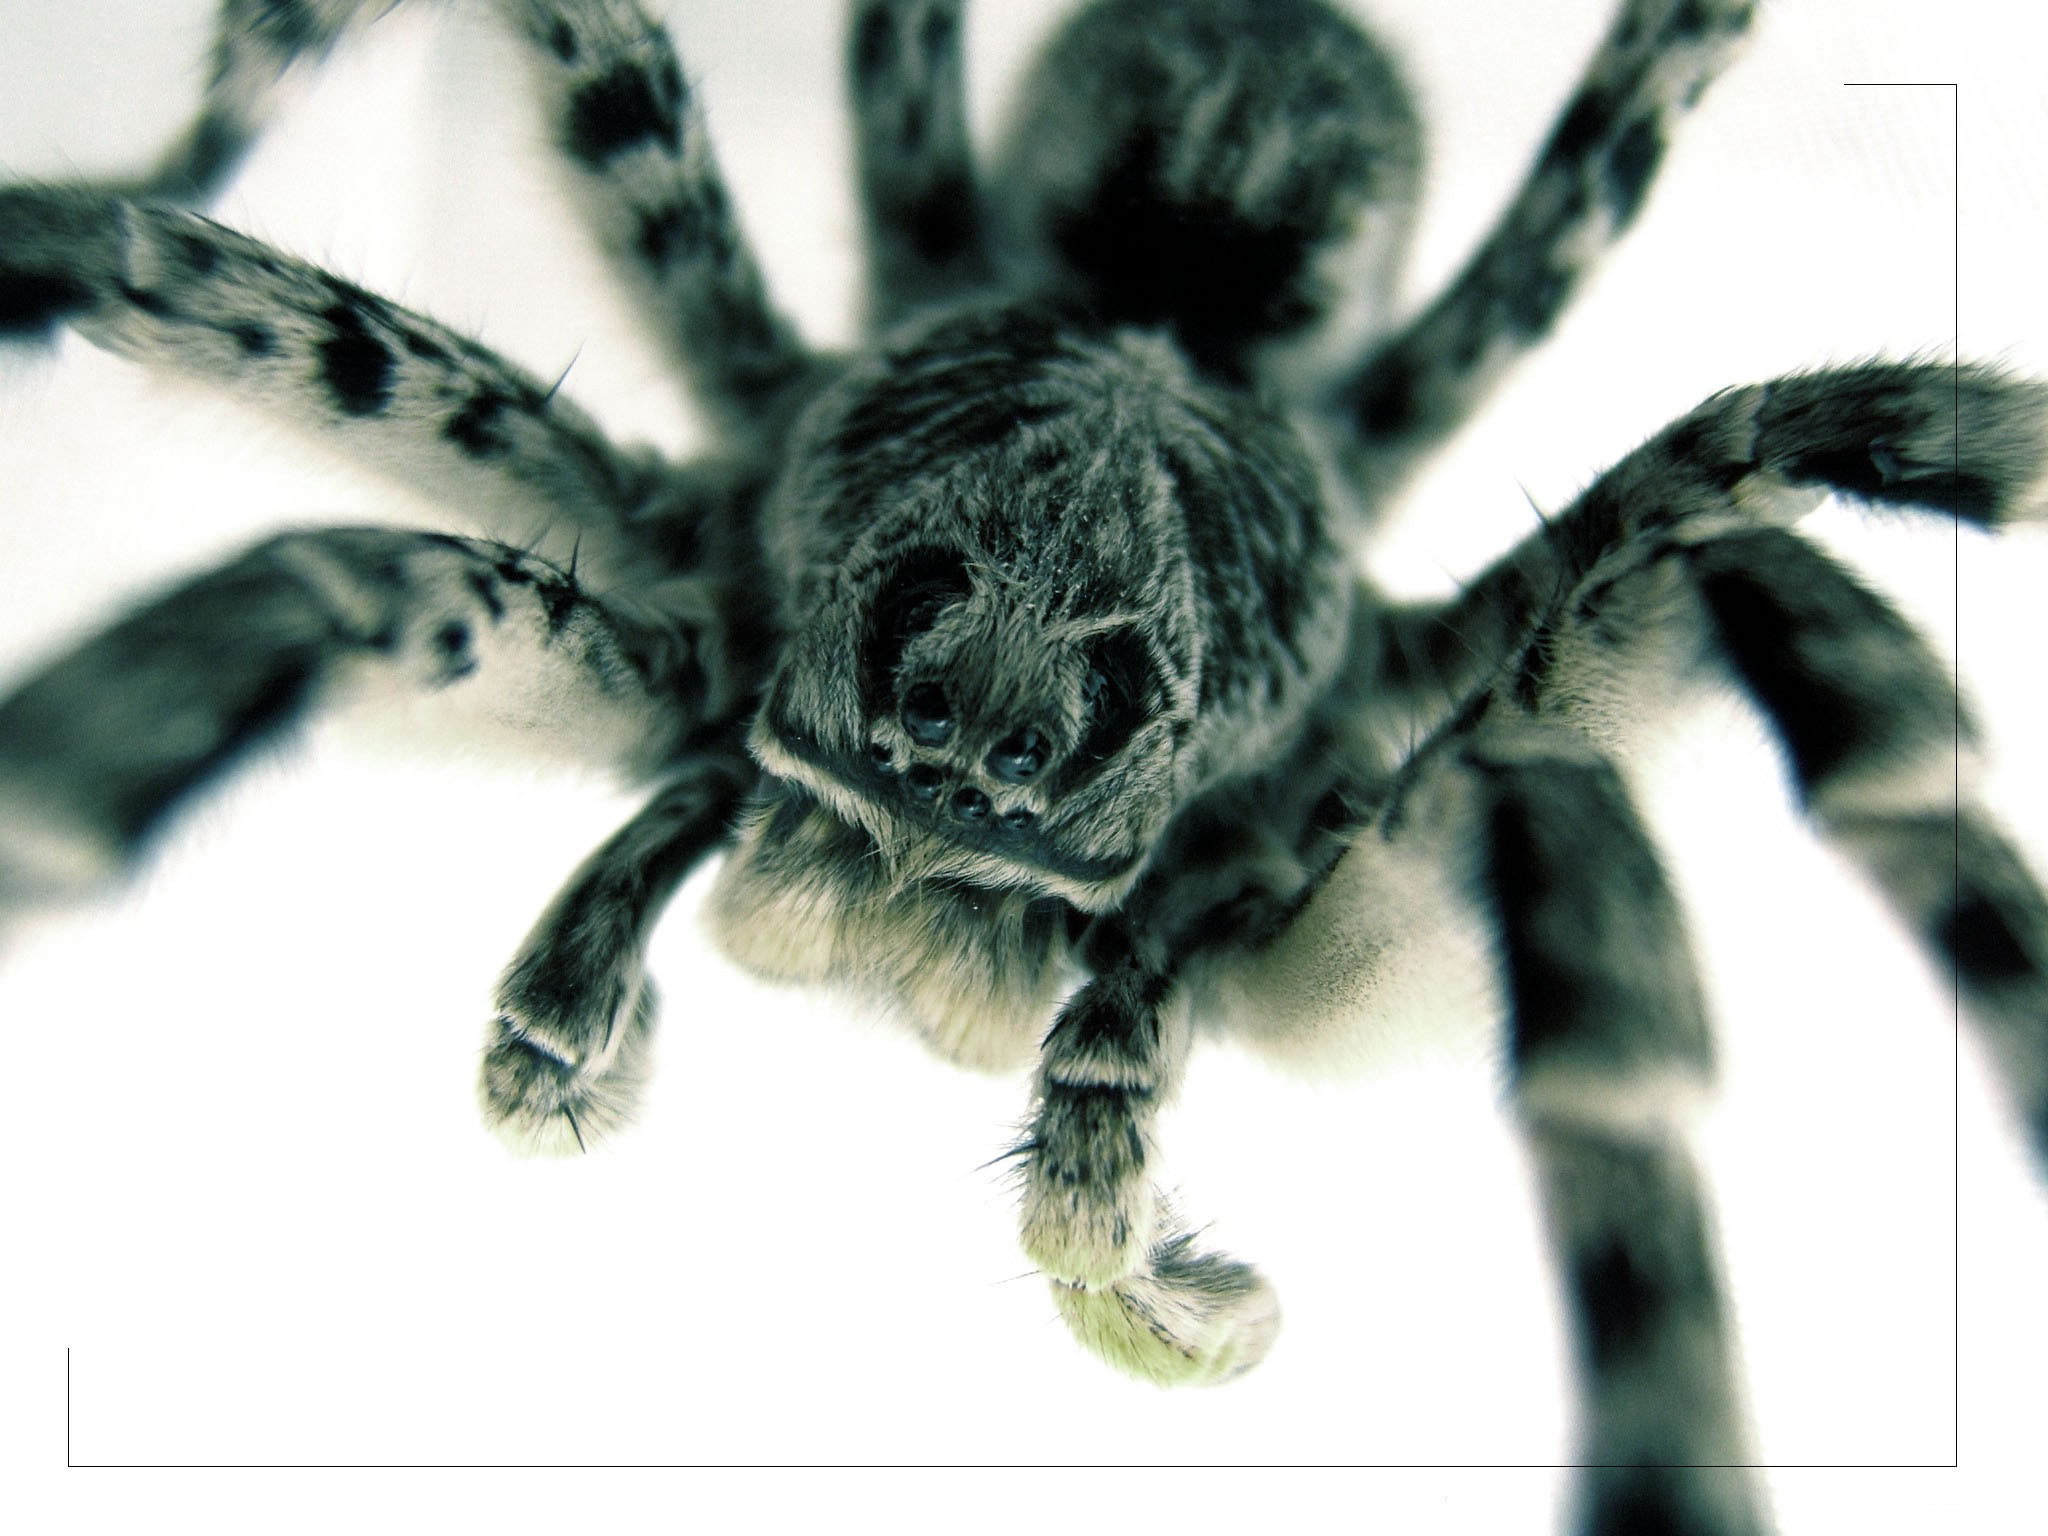 Scary Big Spider Wallpaper And Image Pictures Photos